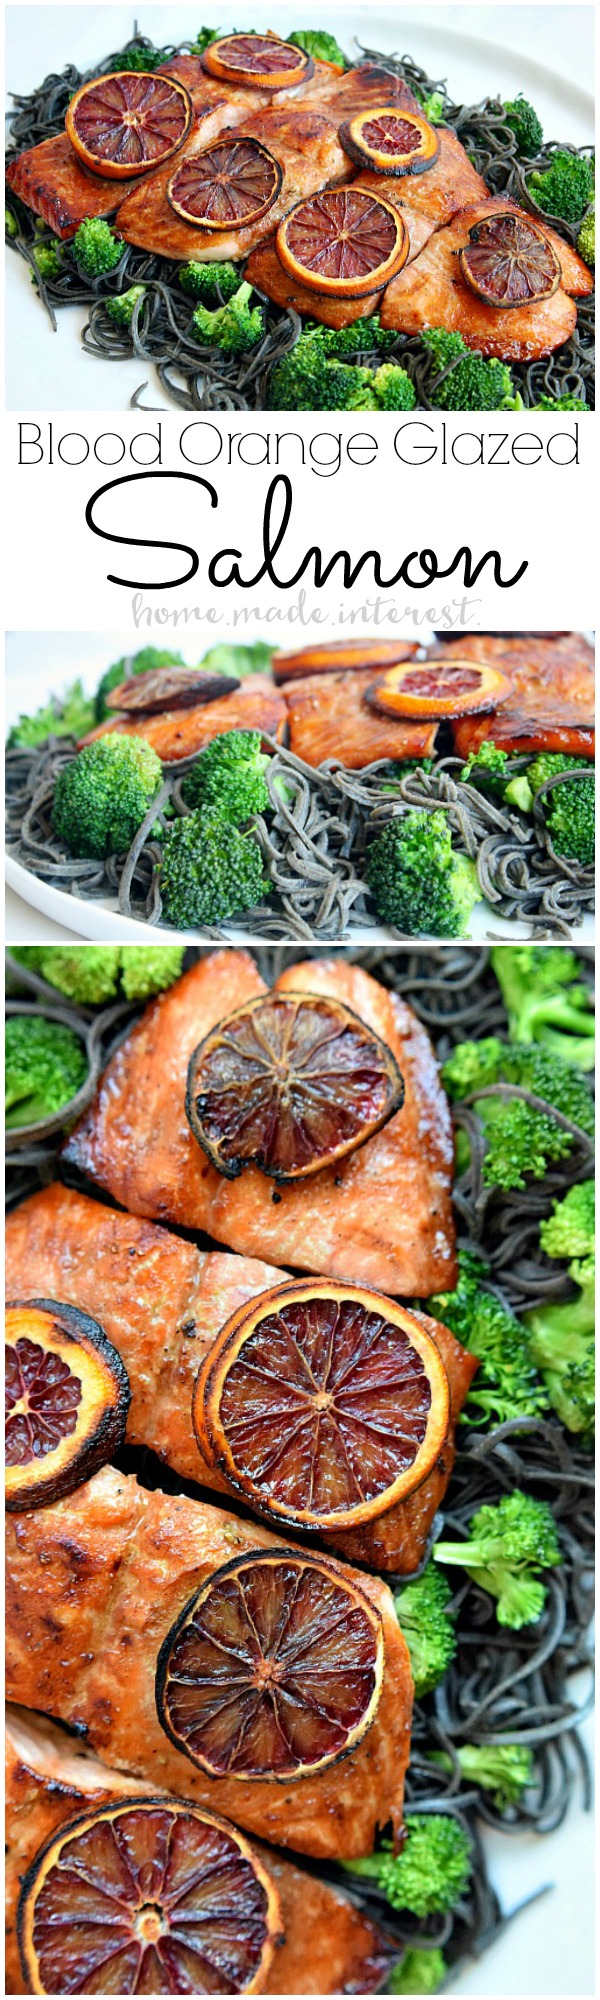 This salmon recipe is so easy to make and everyone in your family will love it. This easy salmon recipe is made with a sweet and salty blood orange glaze for a light, fresh fish dinner. Serve it with some noodles and broccoli and you have a complete meal. 